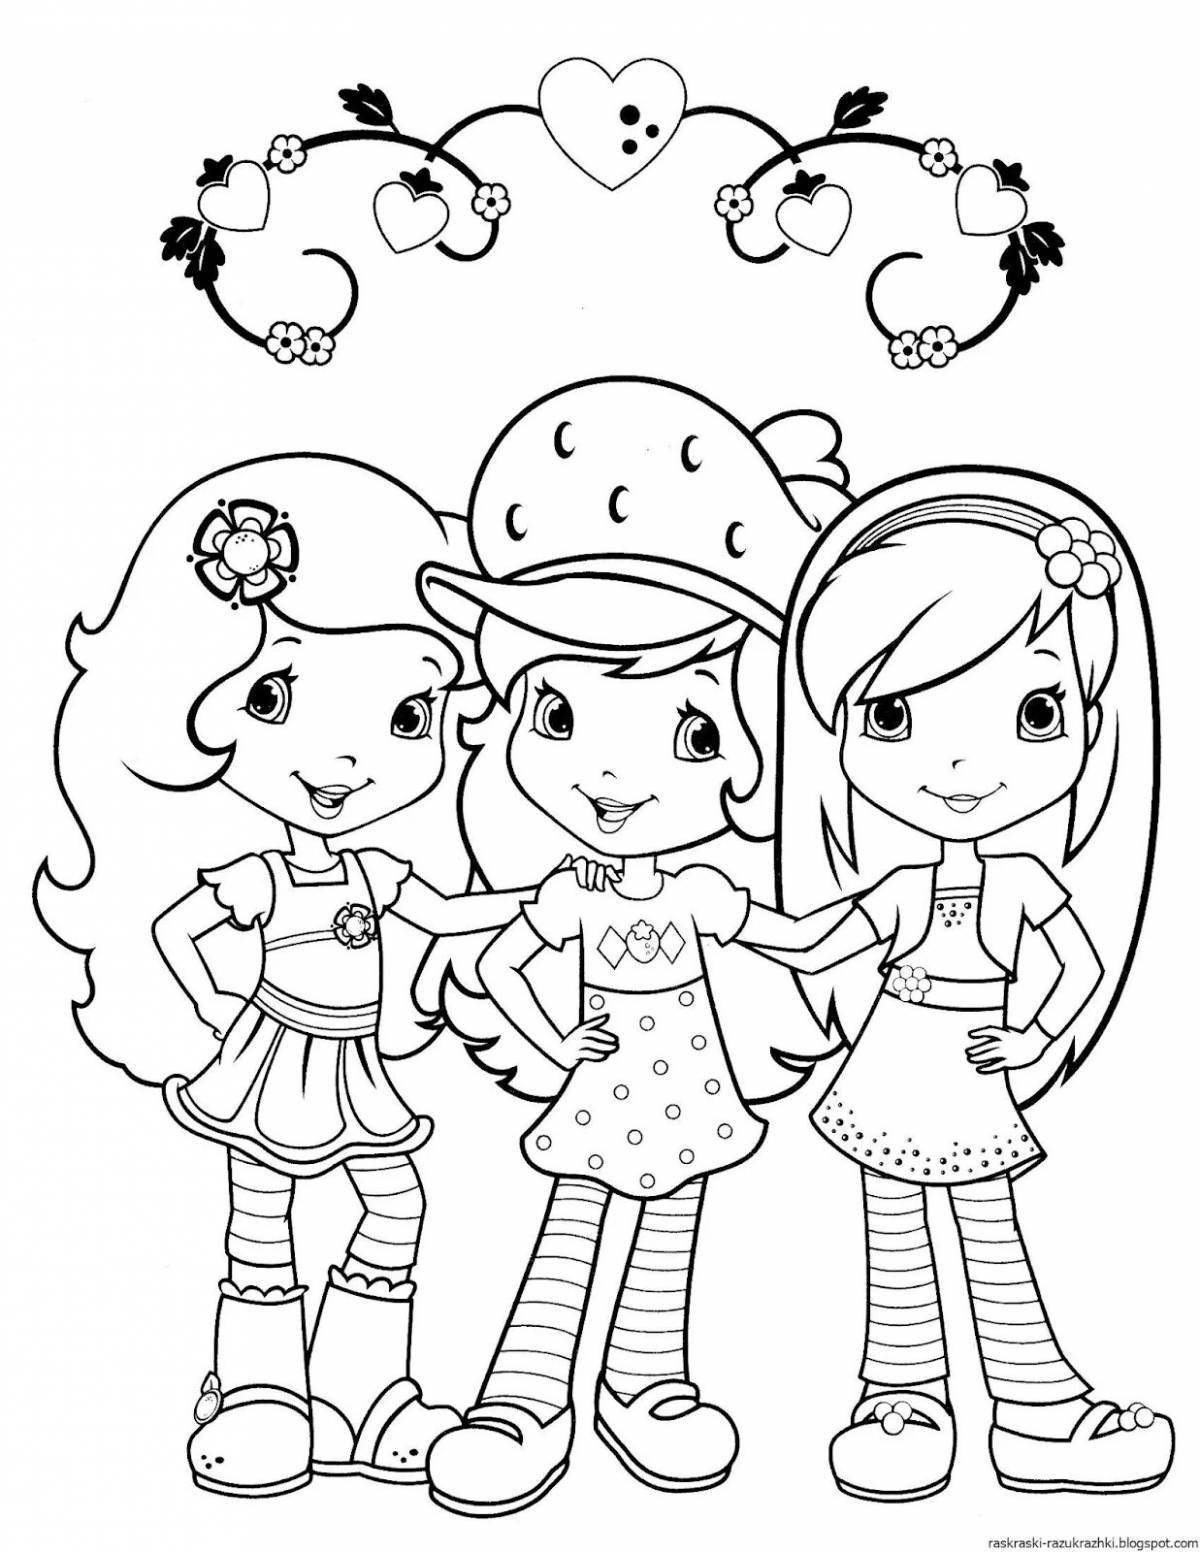 Impressive coloring game for girls 4-5 years old